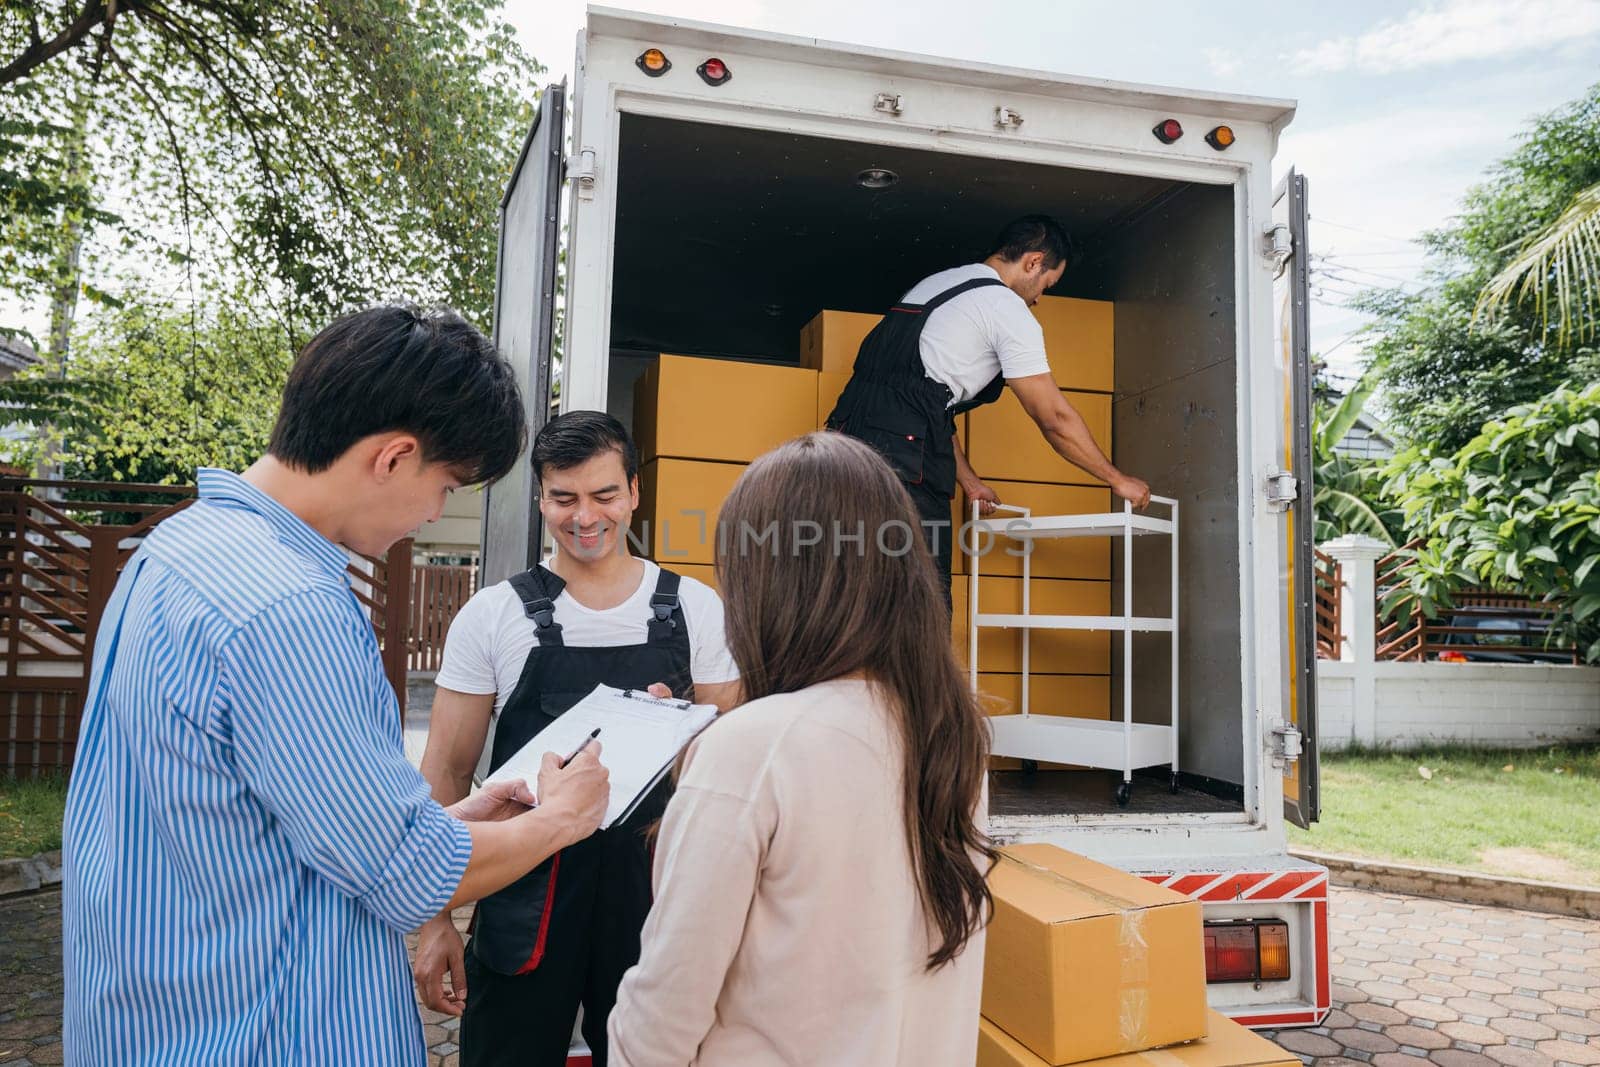 Satisfied newlywed couple signs the delivery checklist aided by professional movers after furniture handling. Uniformed employees ensure customer happiness. Moving Day Concept by Sorapop